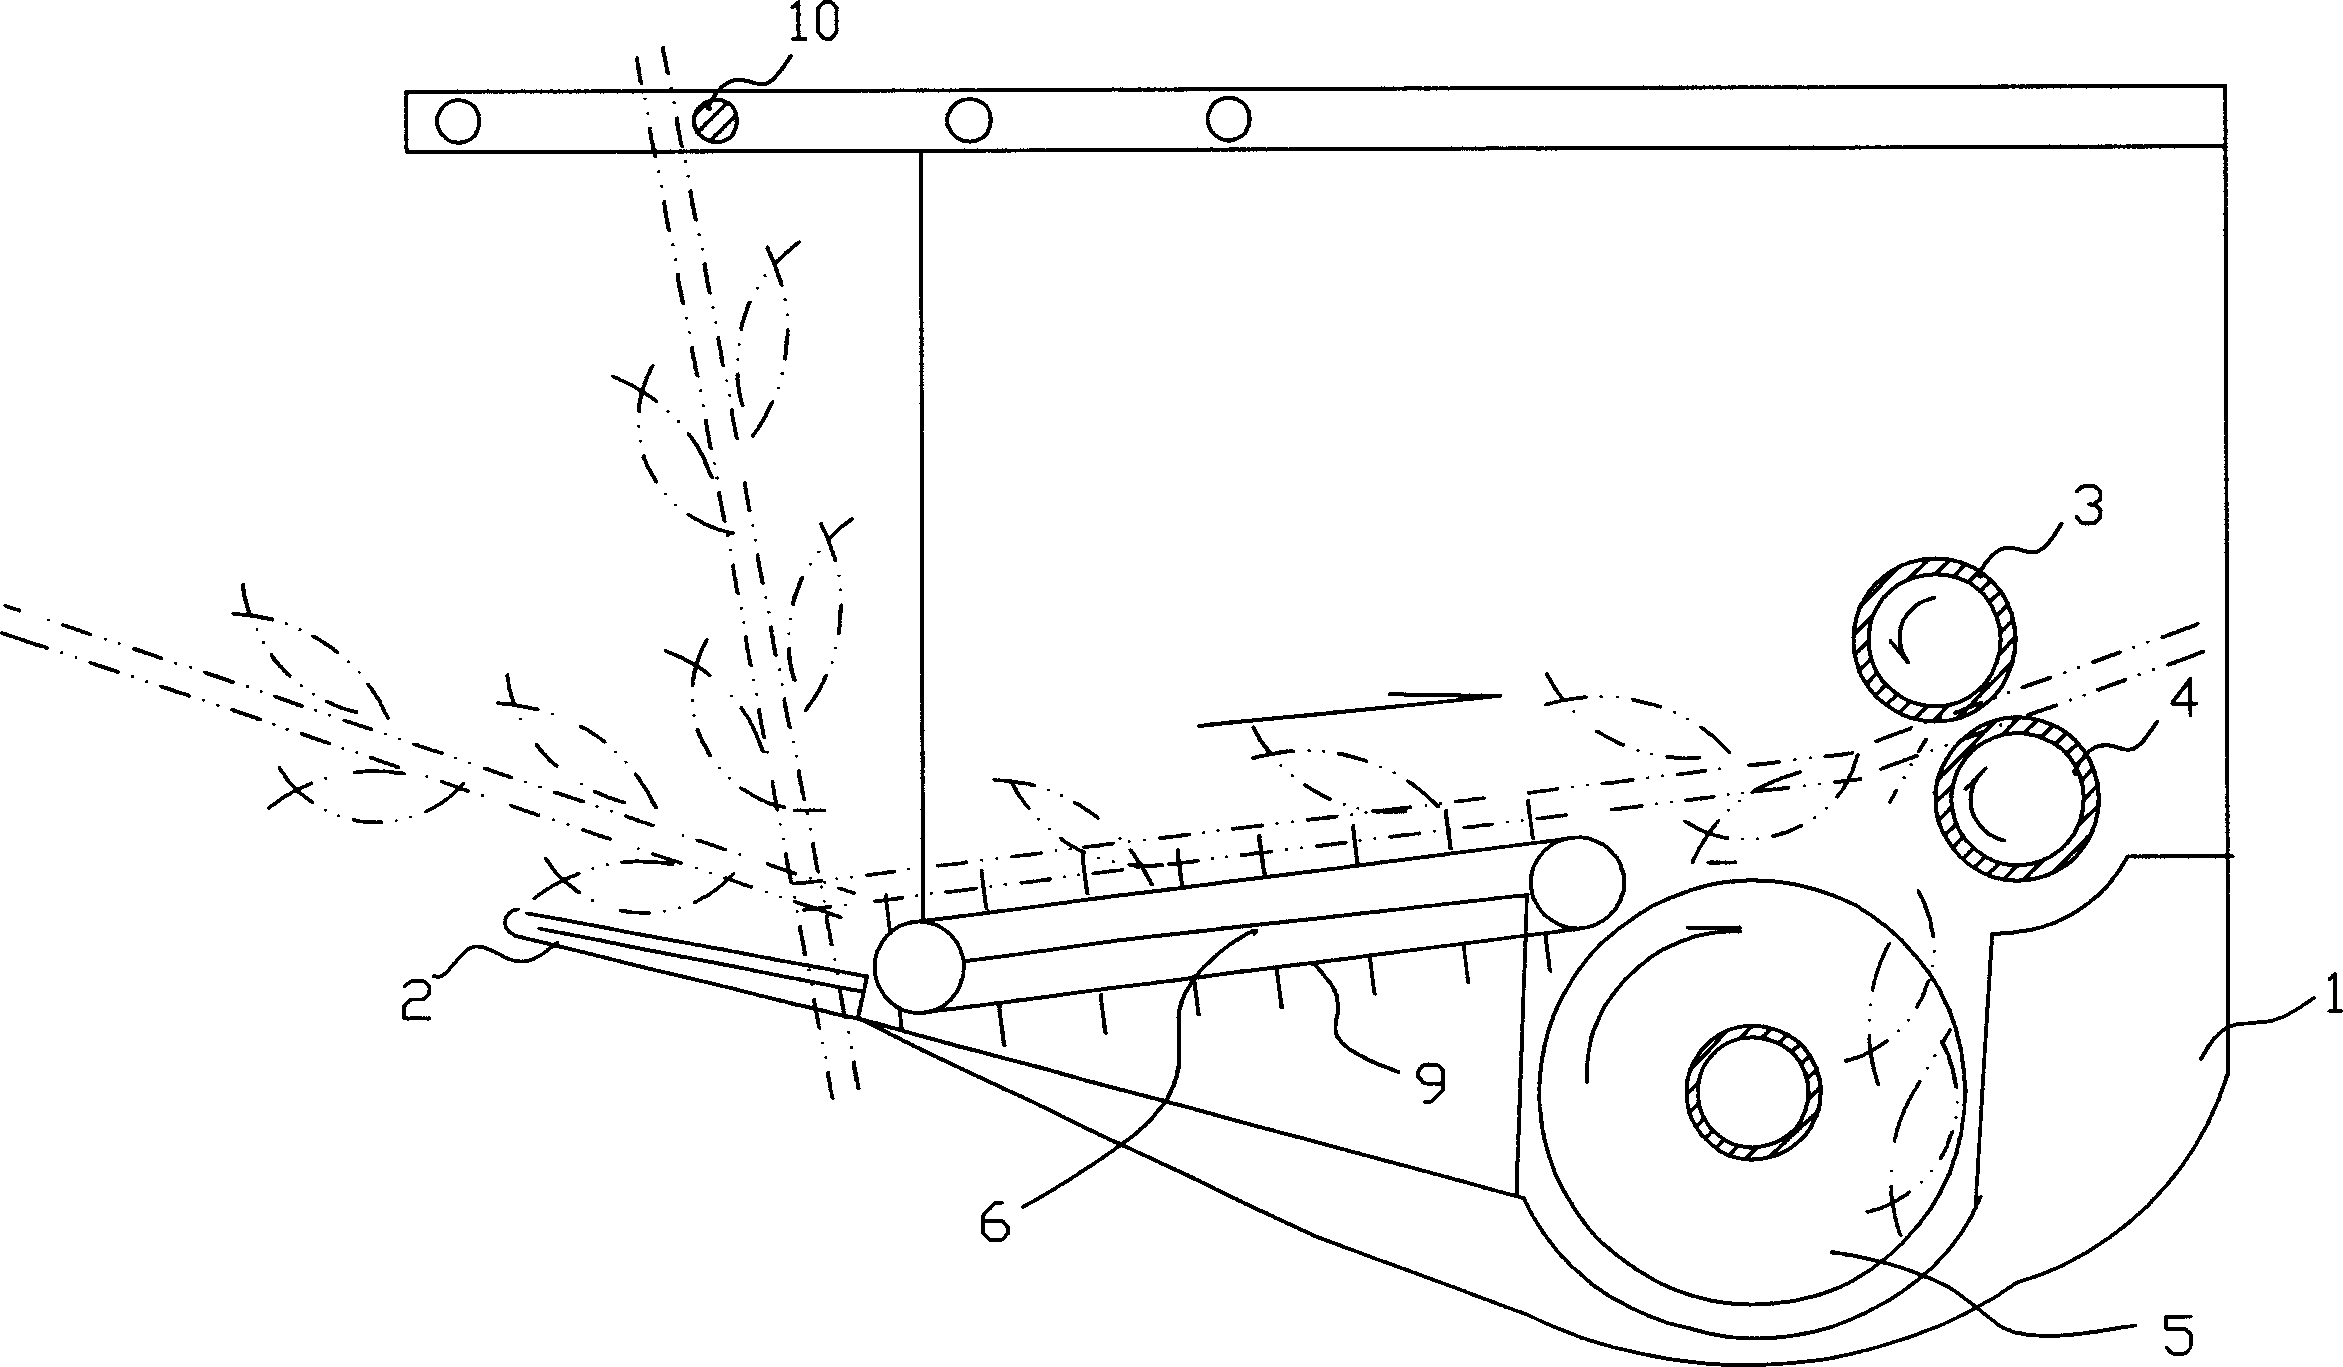 Ear picking cutting table for non-rowed corn combine